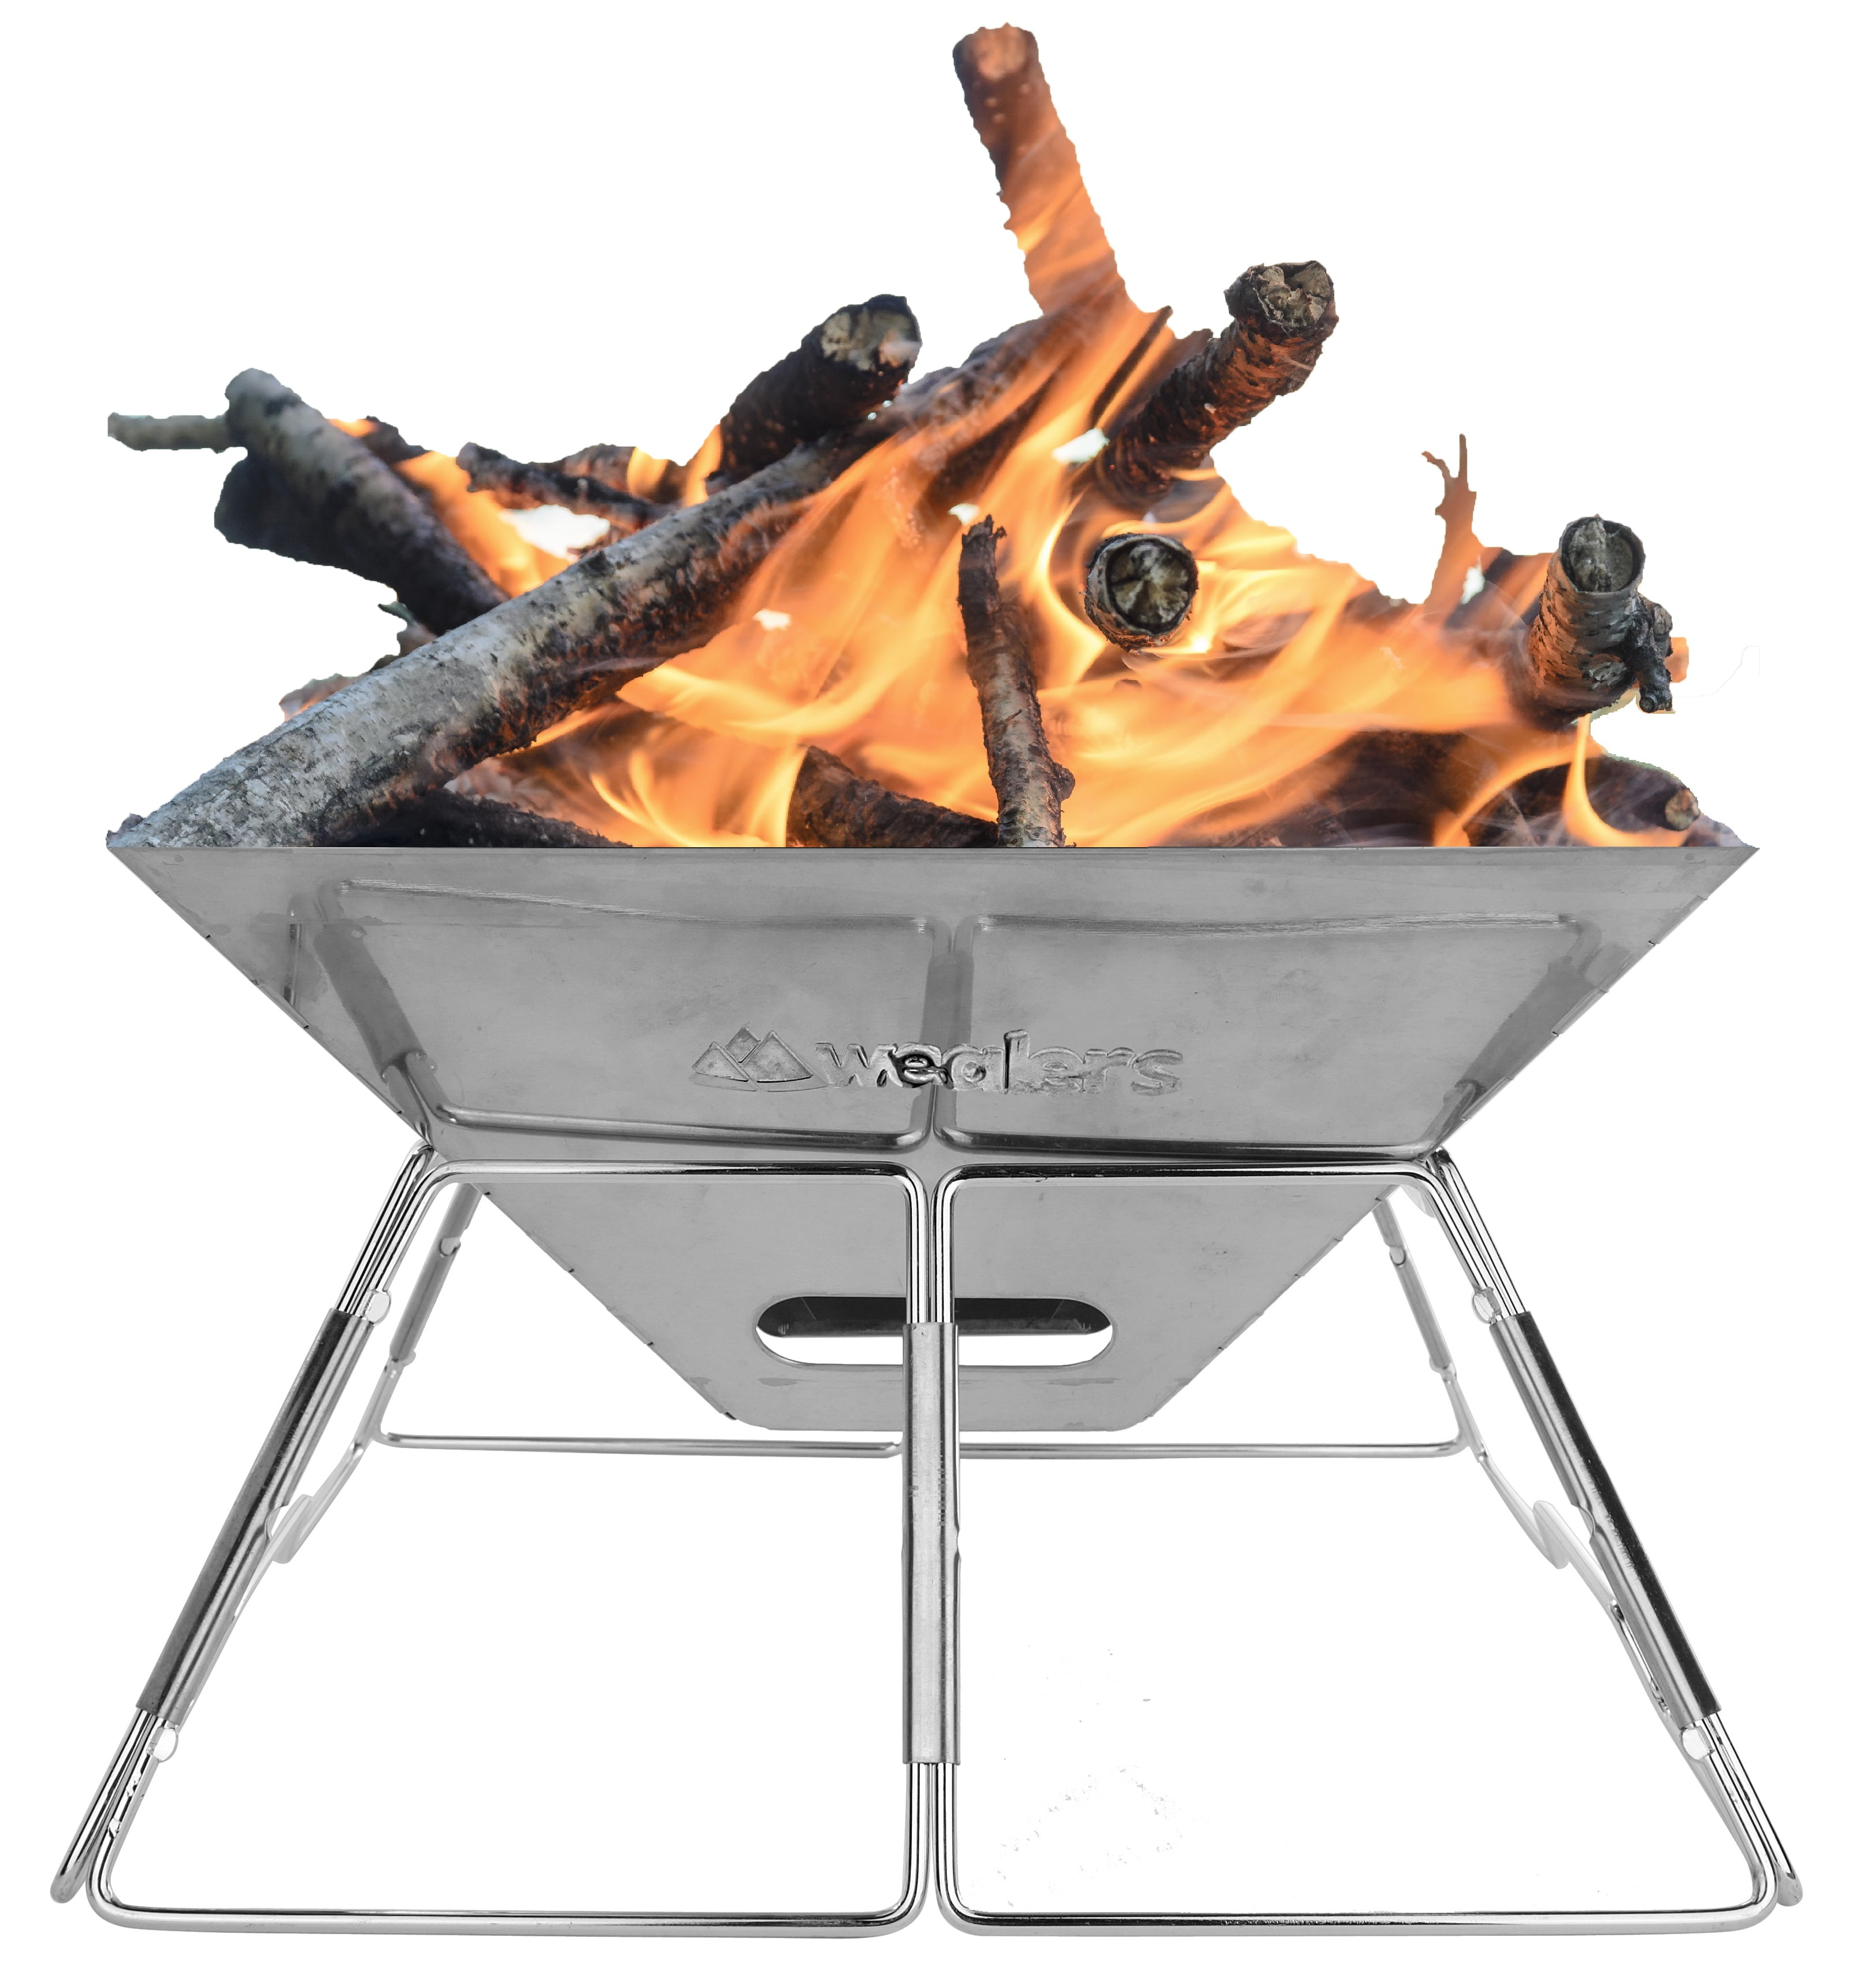 # THE FIRELOG PIT # FIREPIT FIRE PIT PORTABLE CAMPING COLLAPSIBLE CARRY HANDLE